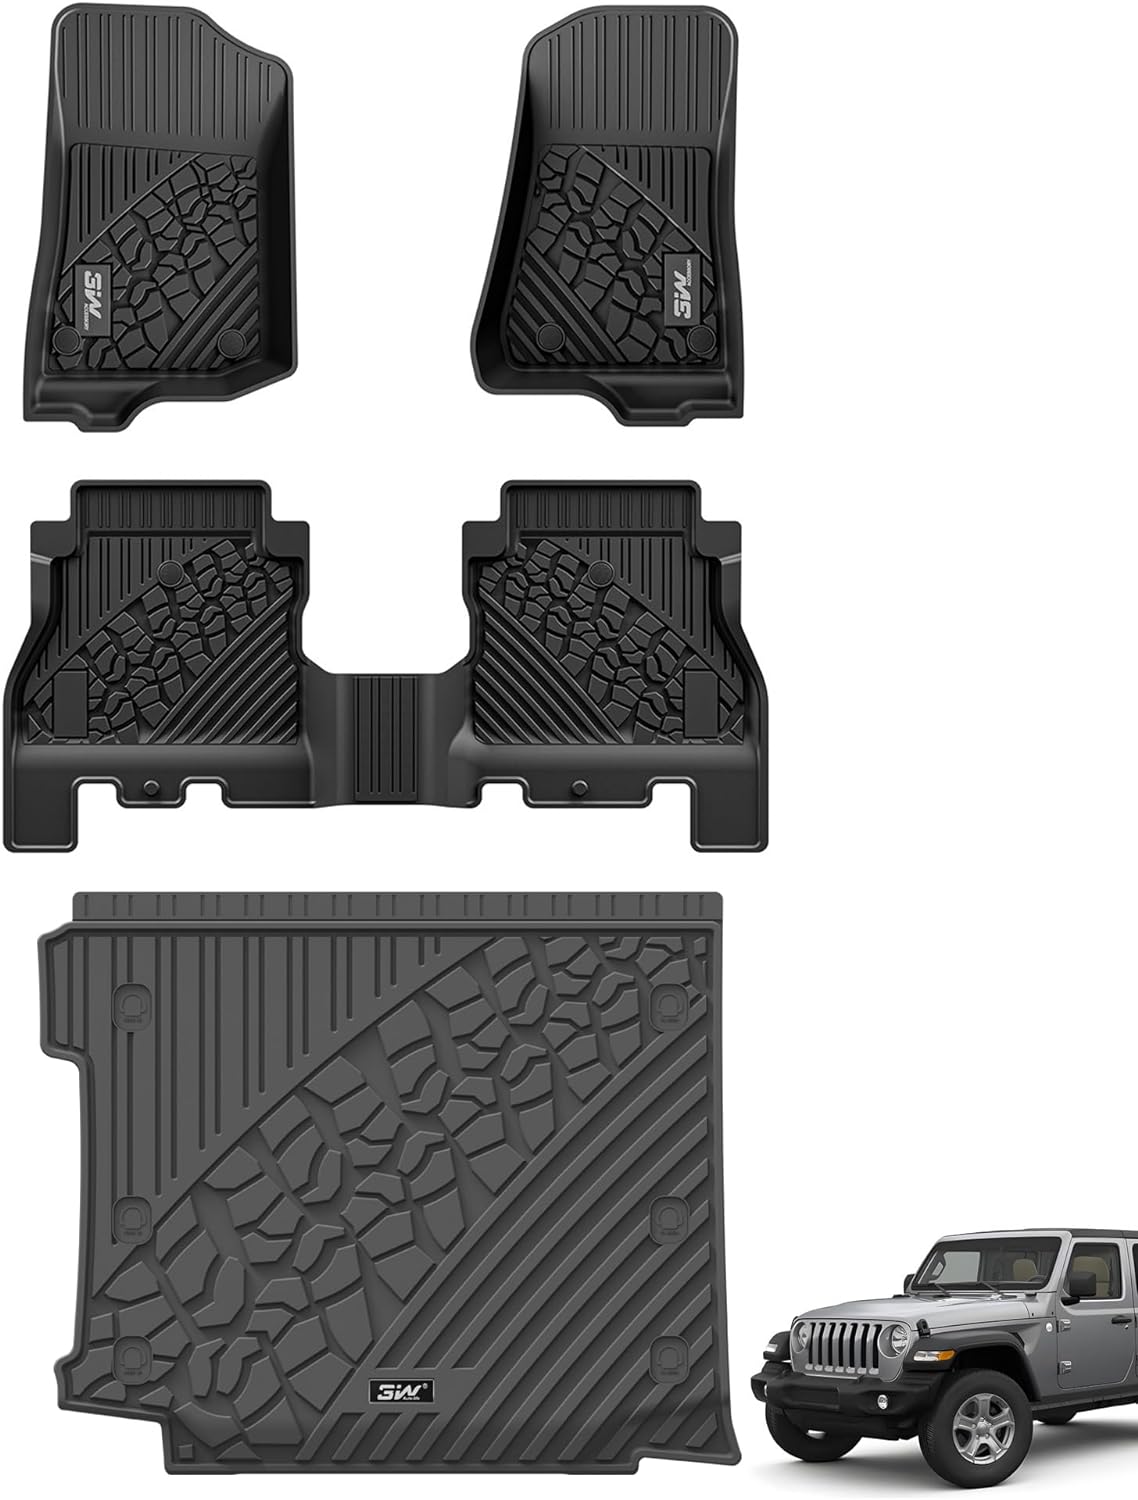 3W Floor Mats&Cargo Liner Fit for Jeep Wrangler JL 2018-2024 Unlimited 4-Door with Subwoofer (Non JK or 4XE) All-Weather TPE Floor Liner for 1st, 2nd Row and Trunk Full Set Car Mats,Black